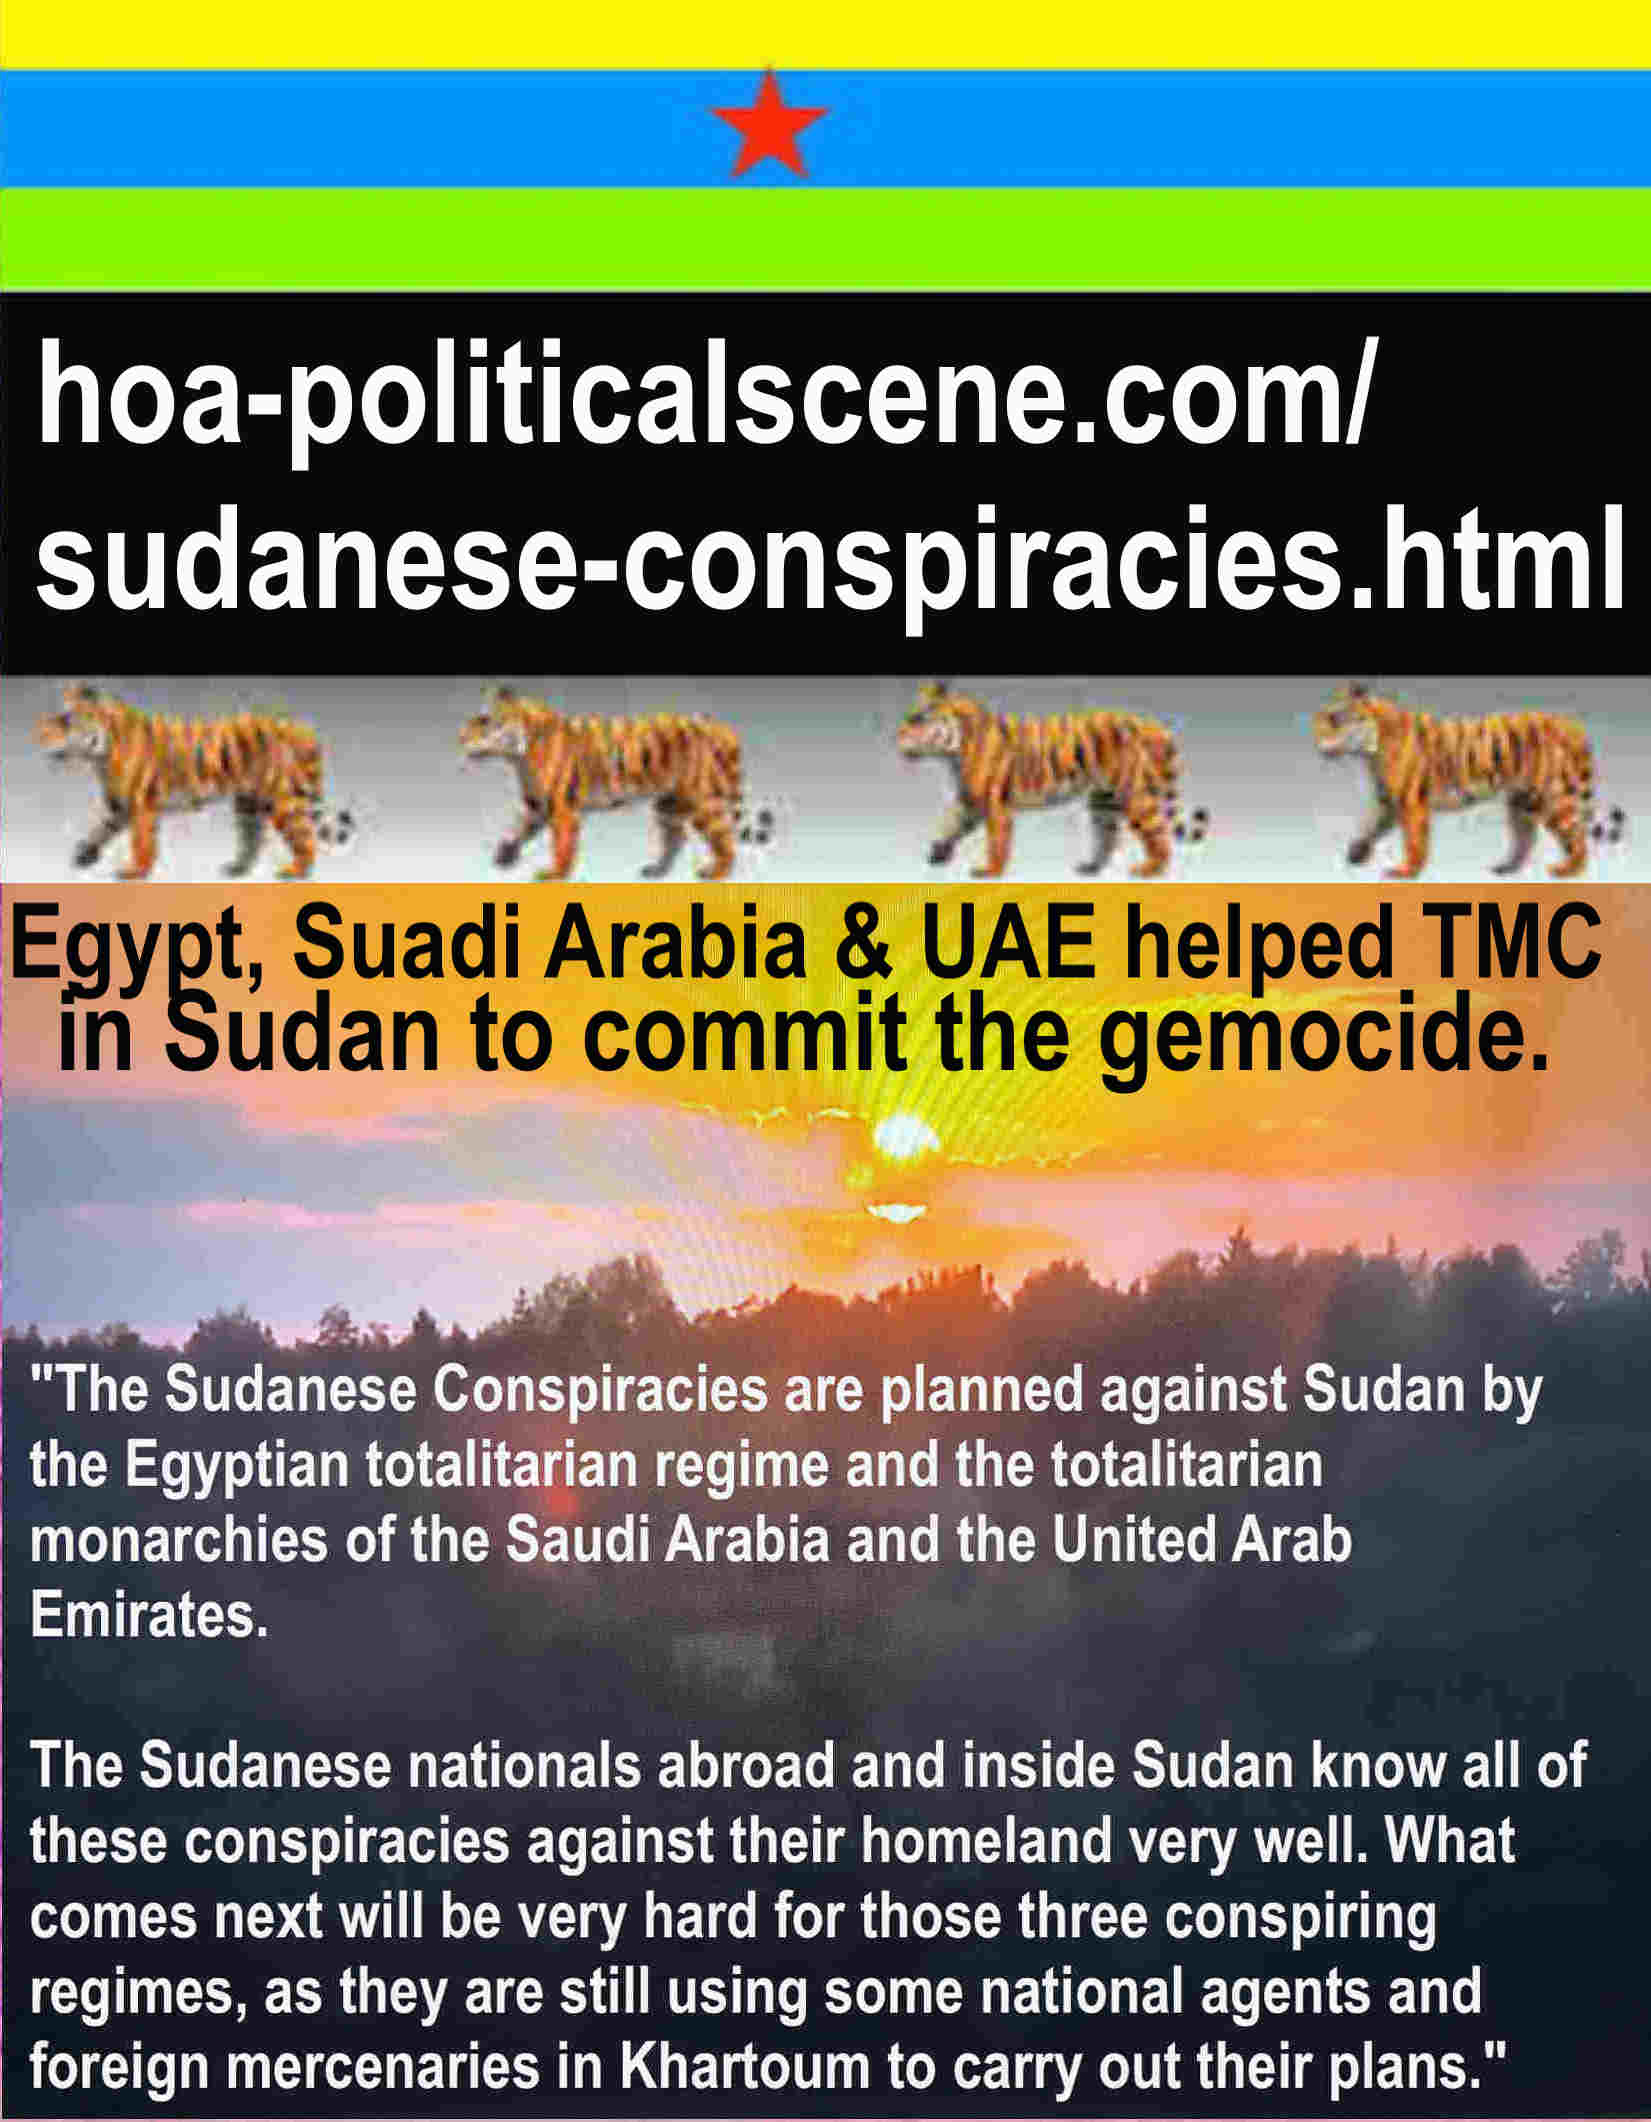 hoa-politicalscene.com/world-social-revolution.html - World Social Revolution: Political superficiality & therefore stupidity of Sudanese is that they continue demonstrating in the streets & fail.